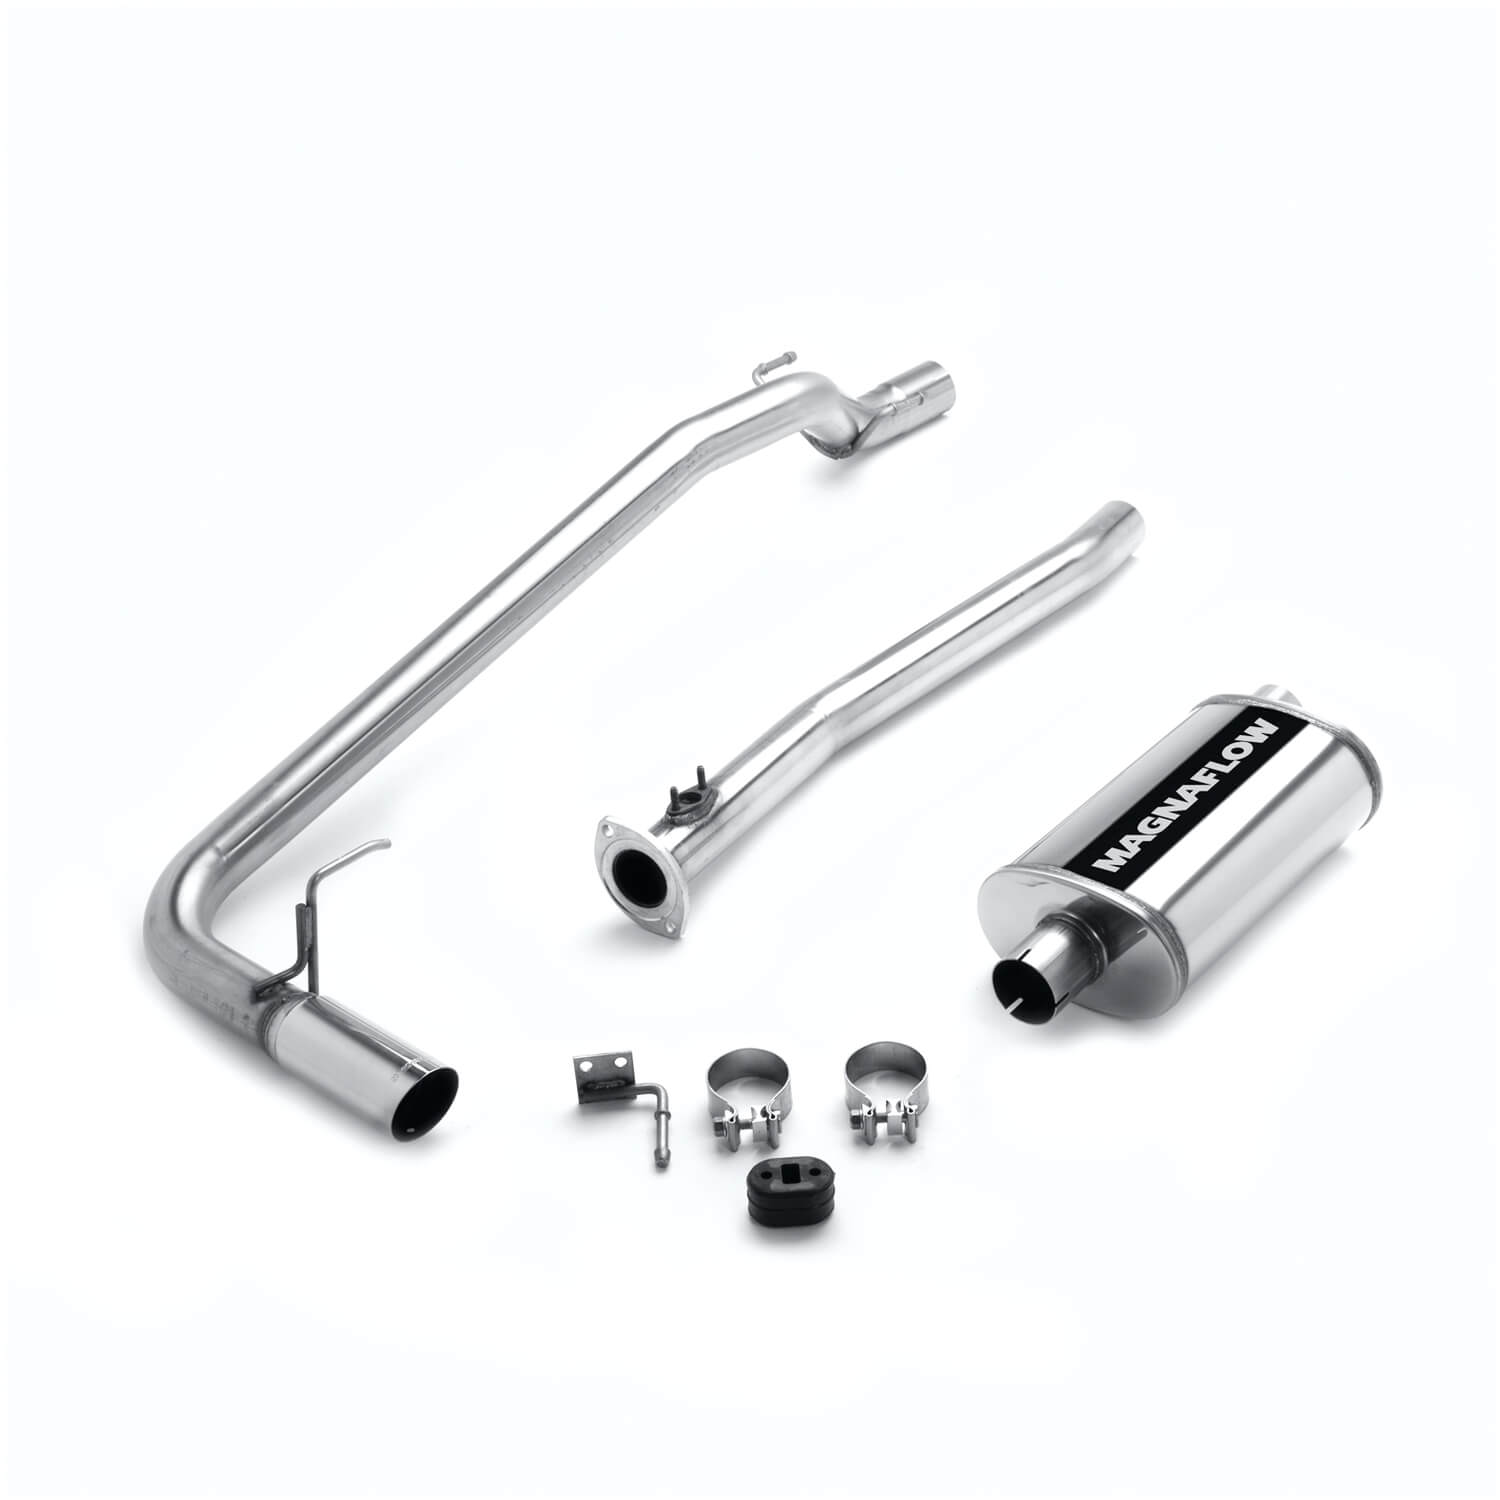 MF Series Cat-Back Exhaust System 2001-04 Tacoma 2WD 3.4L (Ext. Cab, 61.5" Bed)